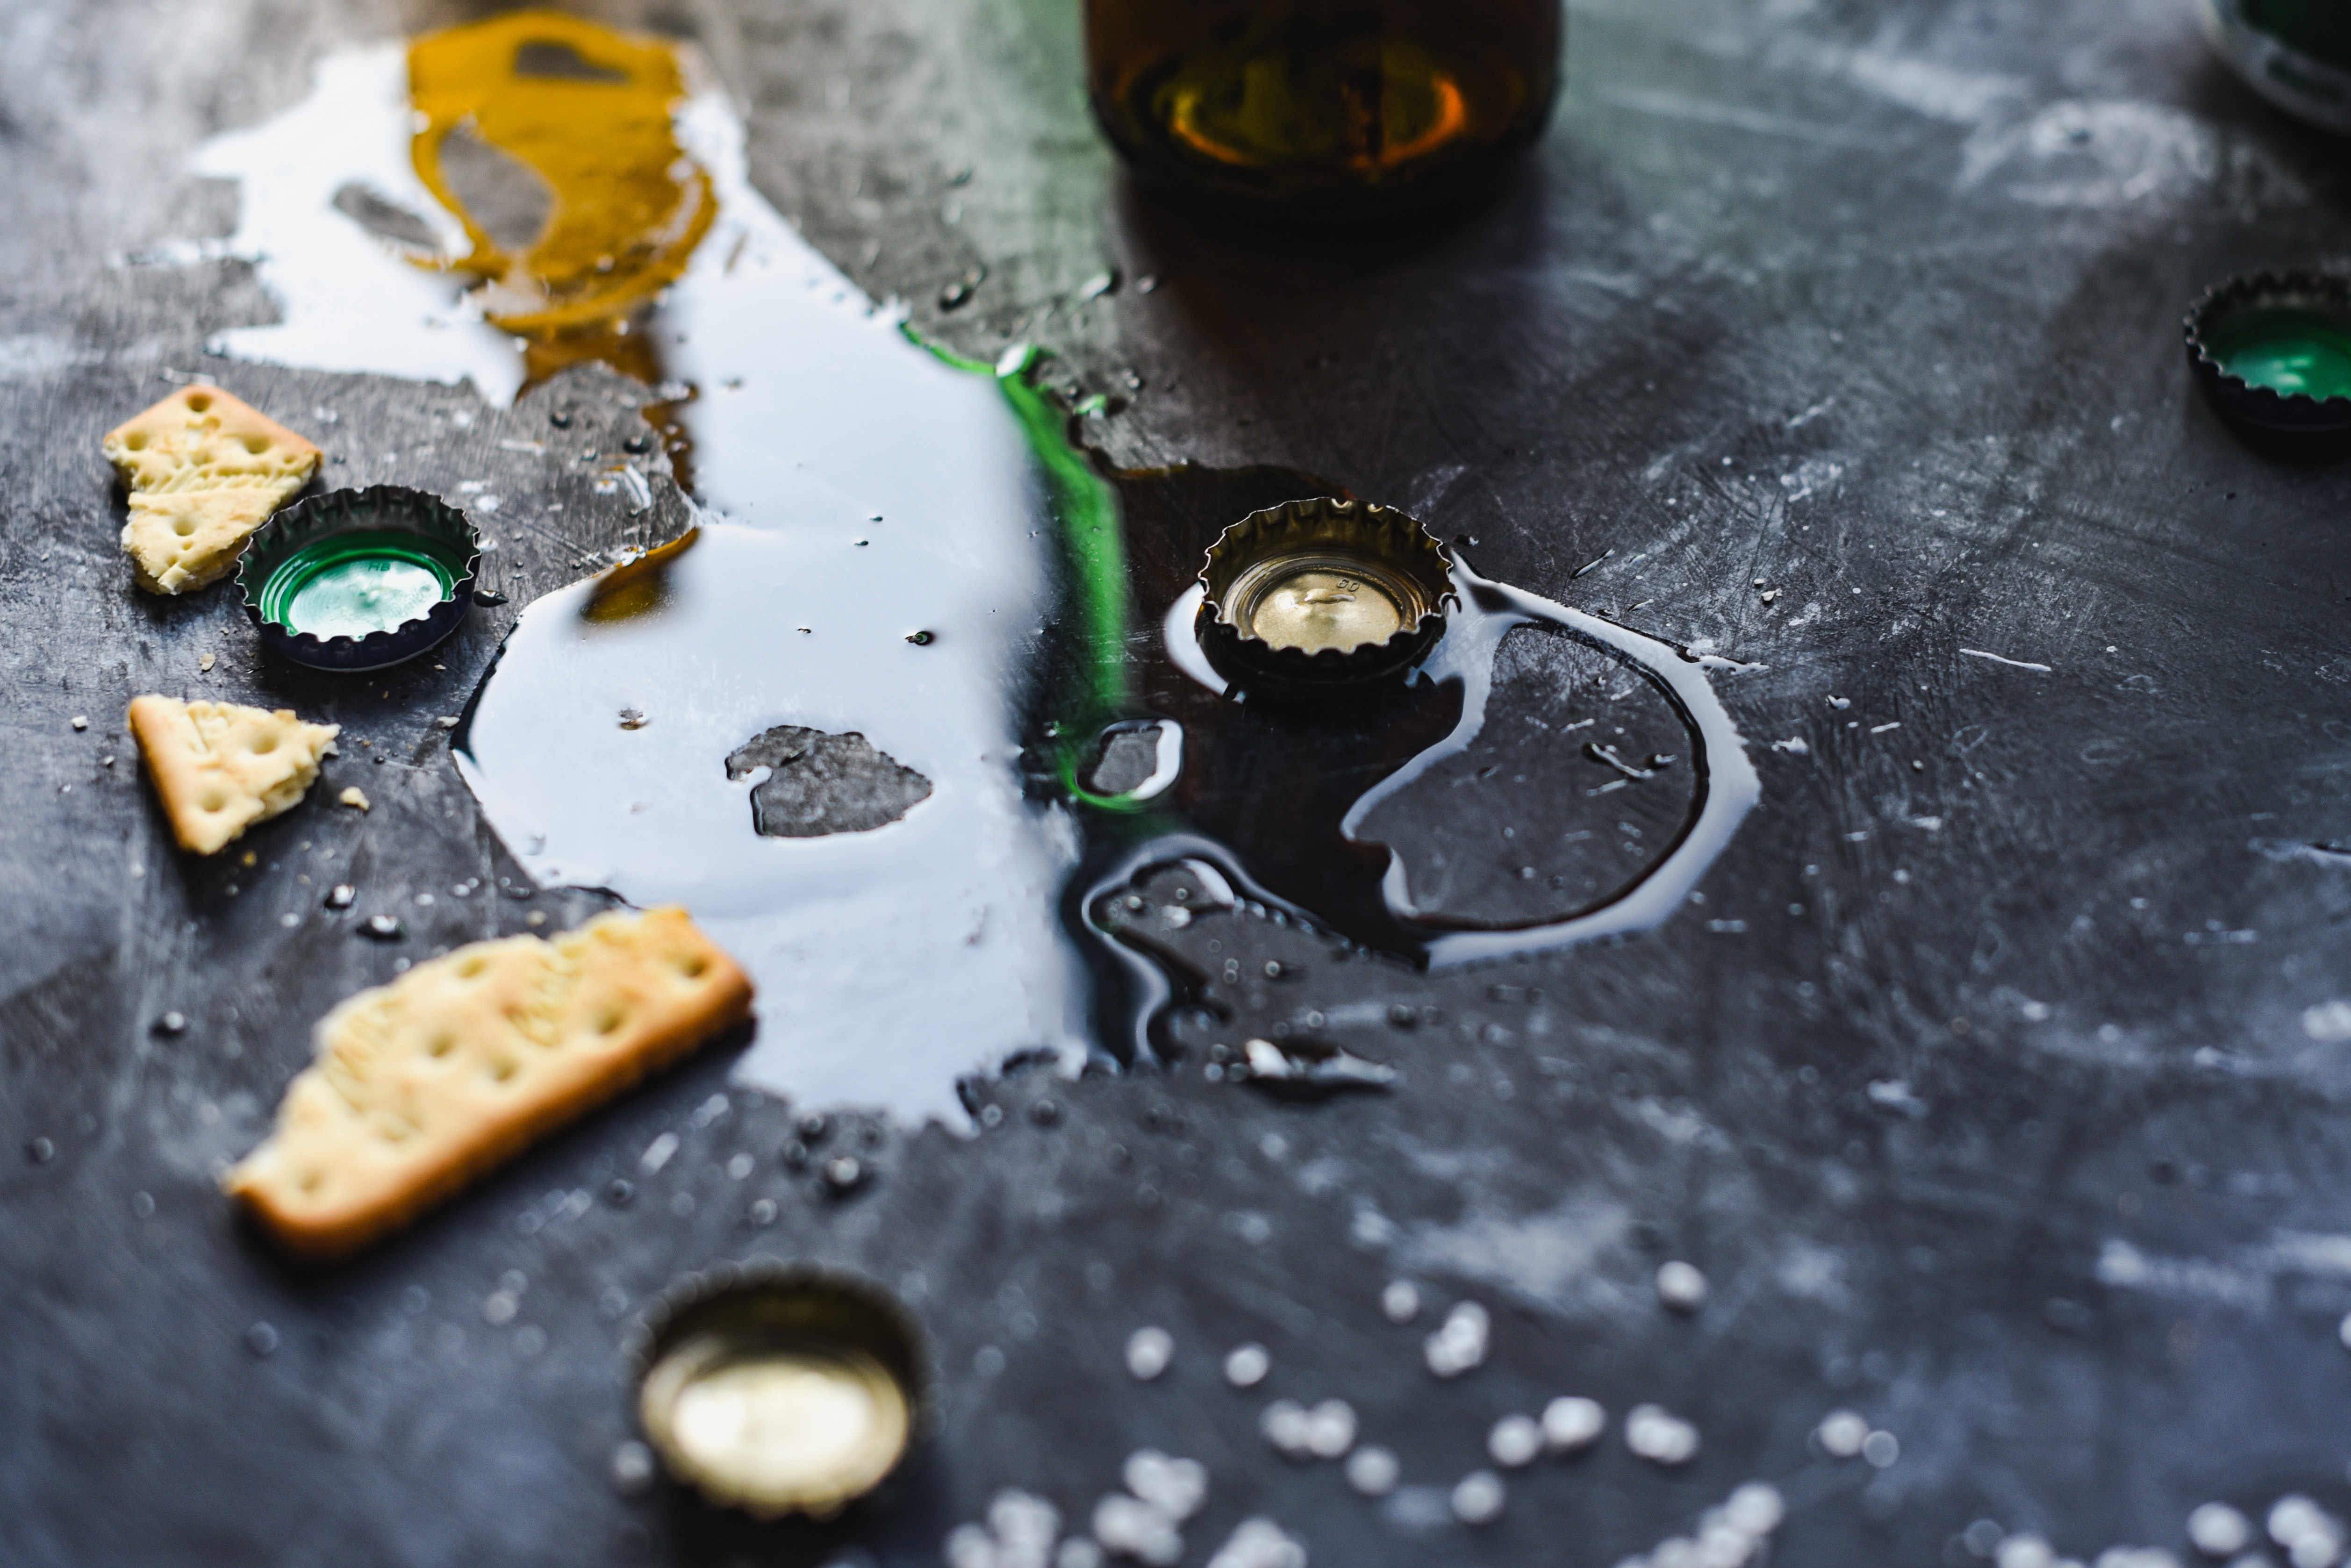 Spilled beer on a black background with beer bottle caps and crakers; image by Anshu A, via Unsplash.com